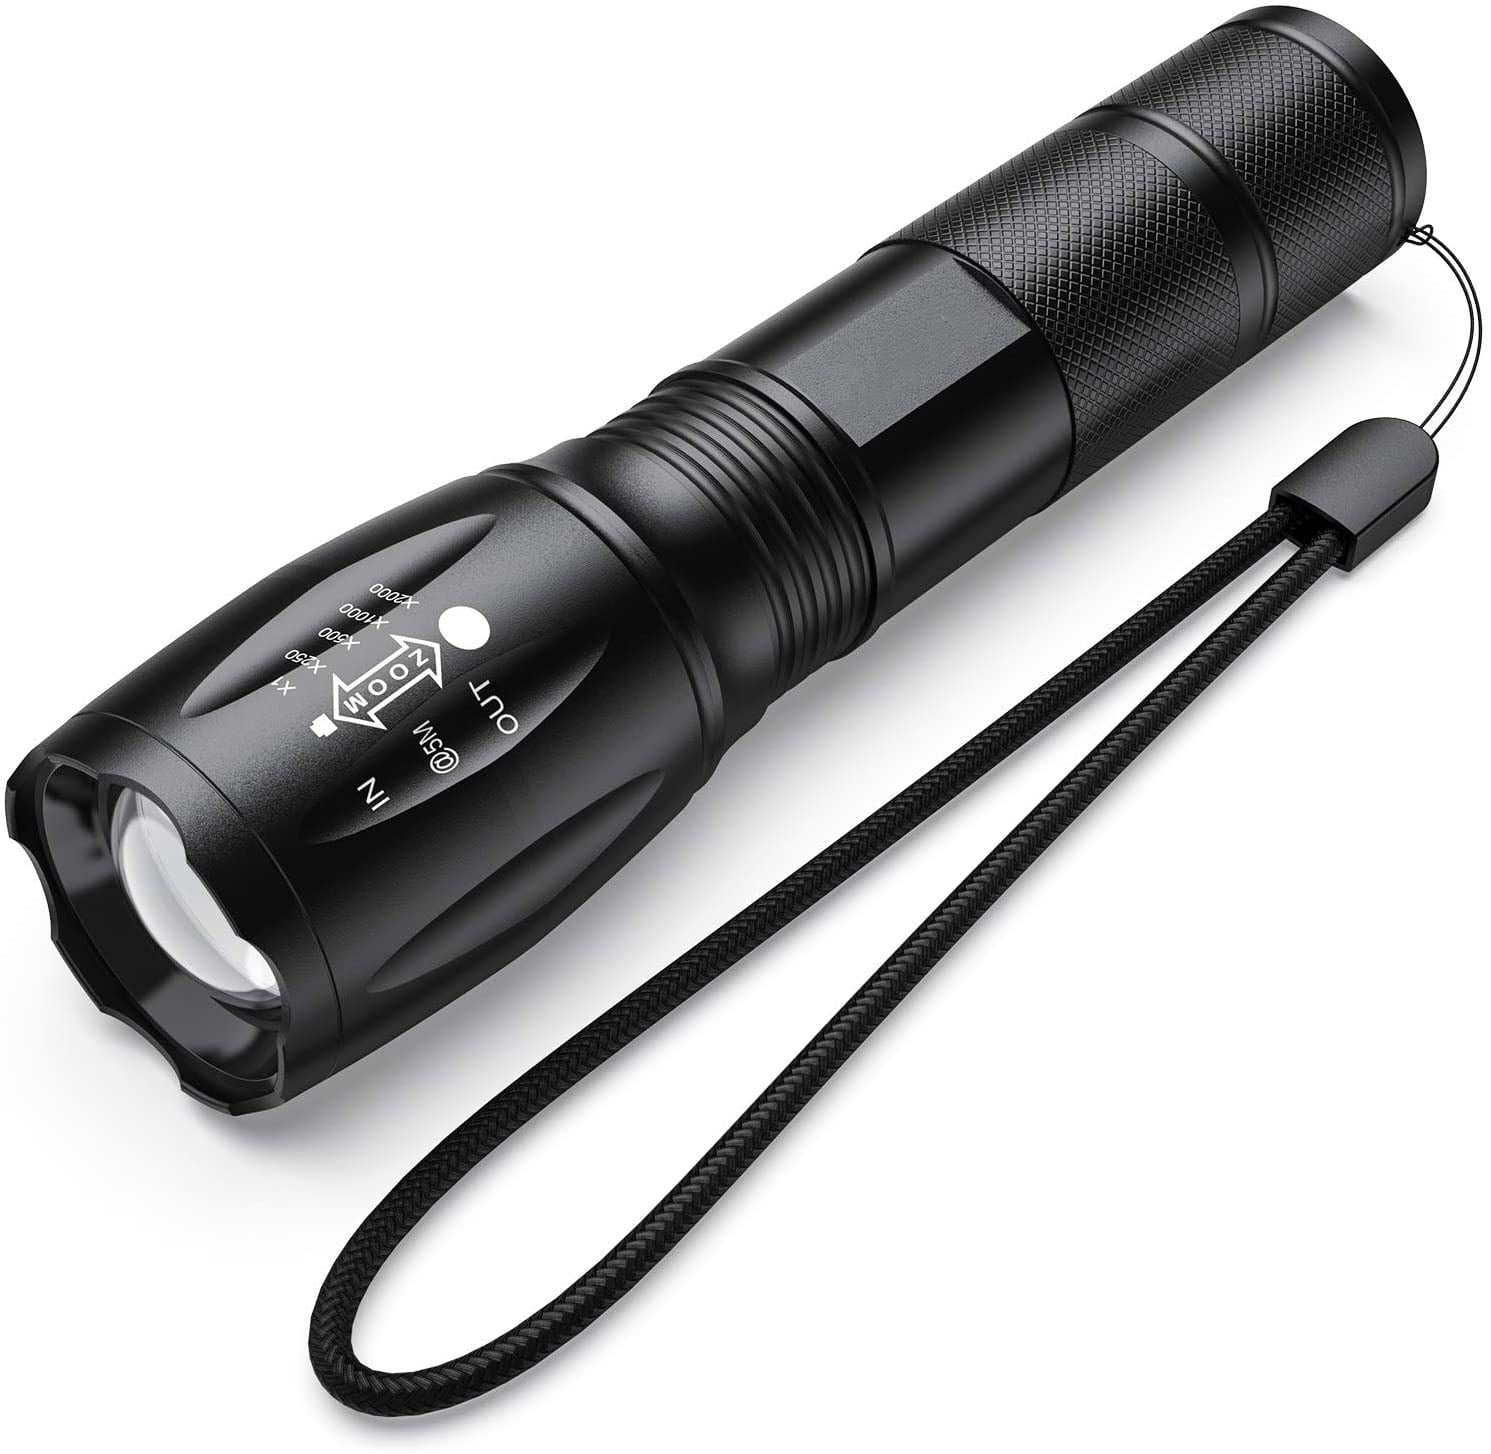 Super Bright 8000LM CREE XML2 T6 LED Zoom Tactical Military Flashlight Torch Set 